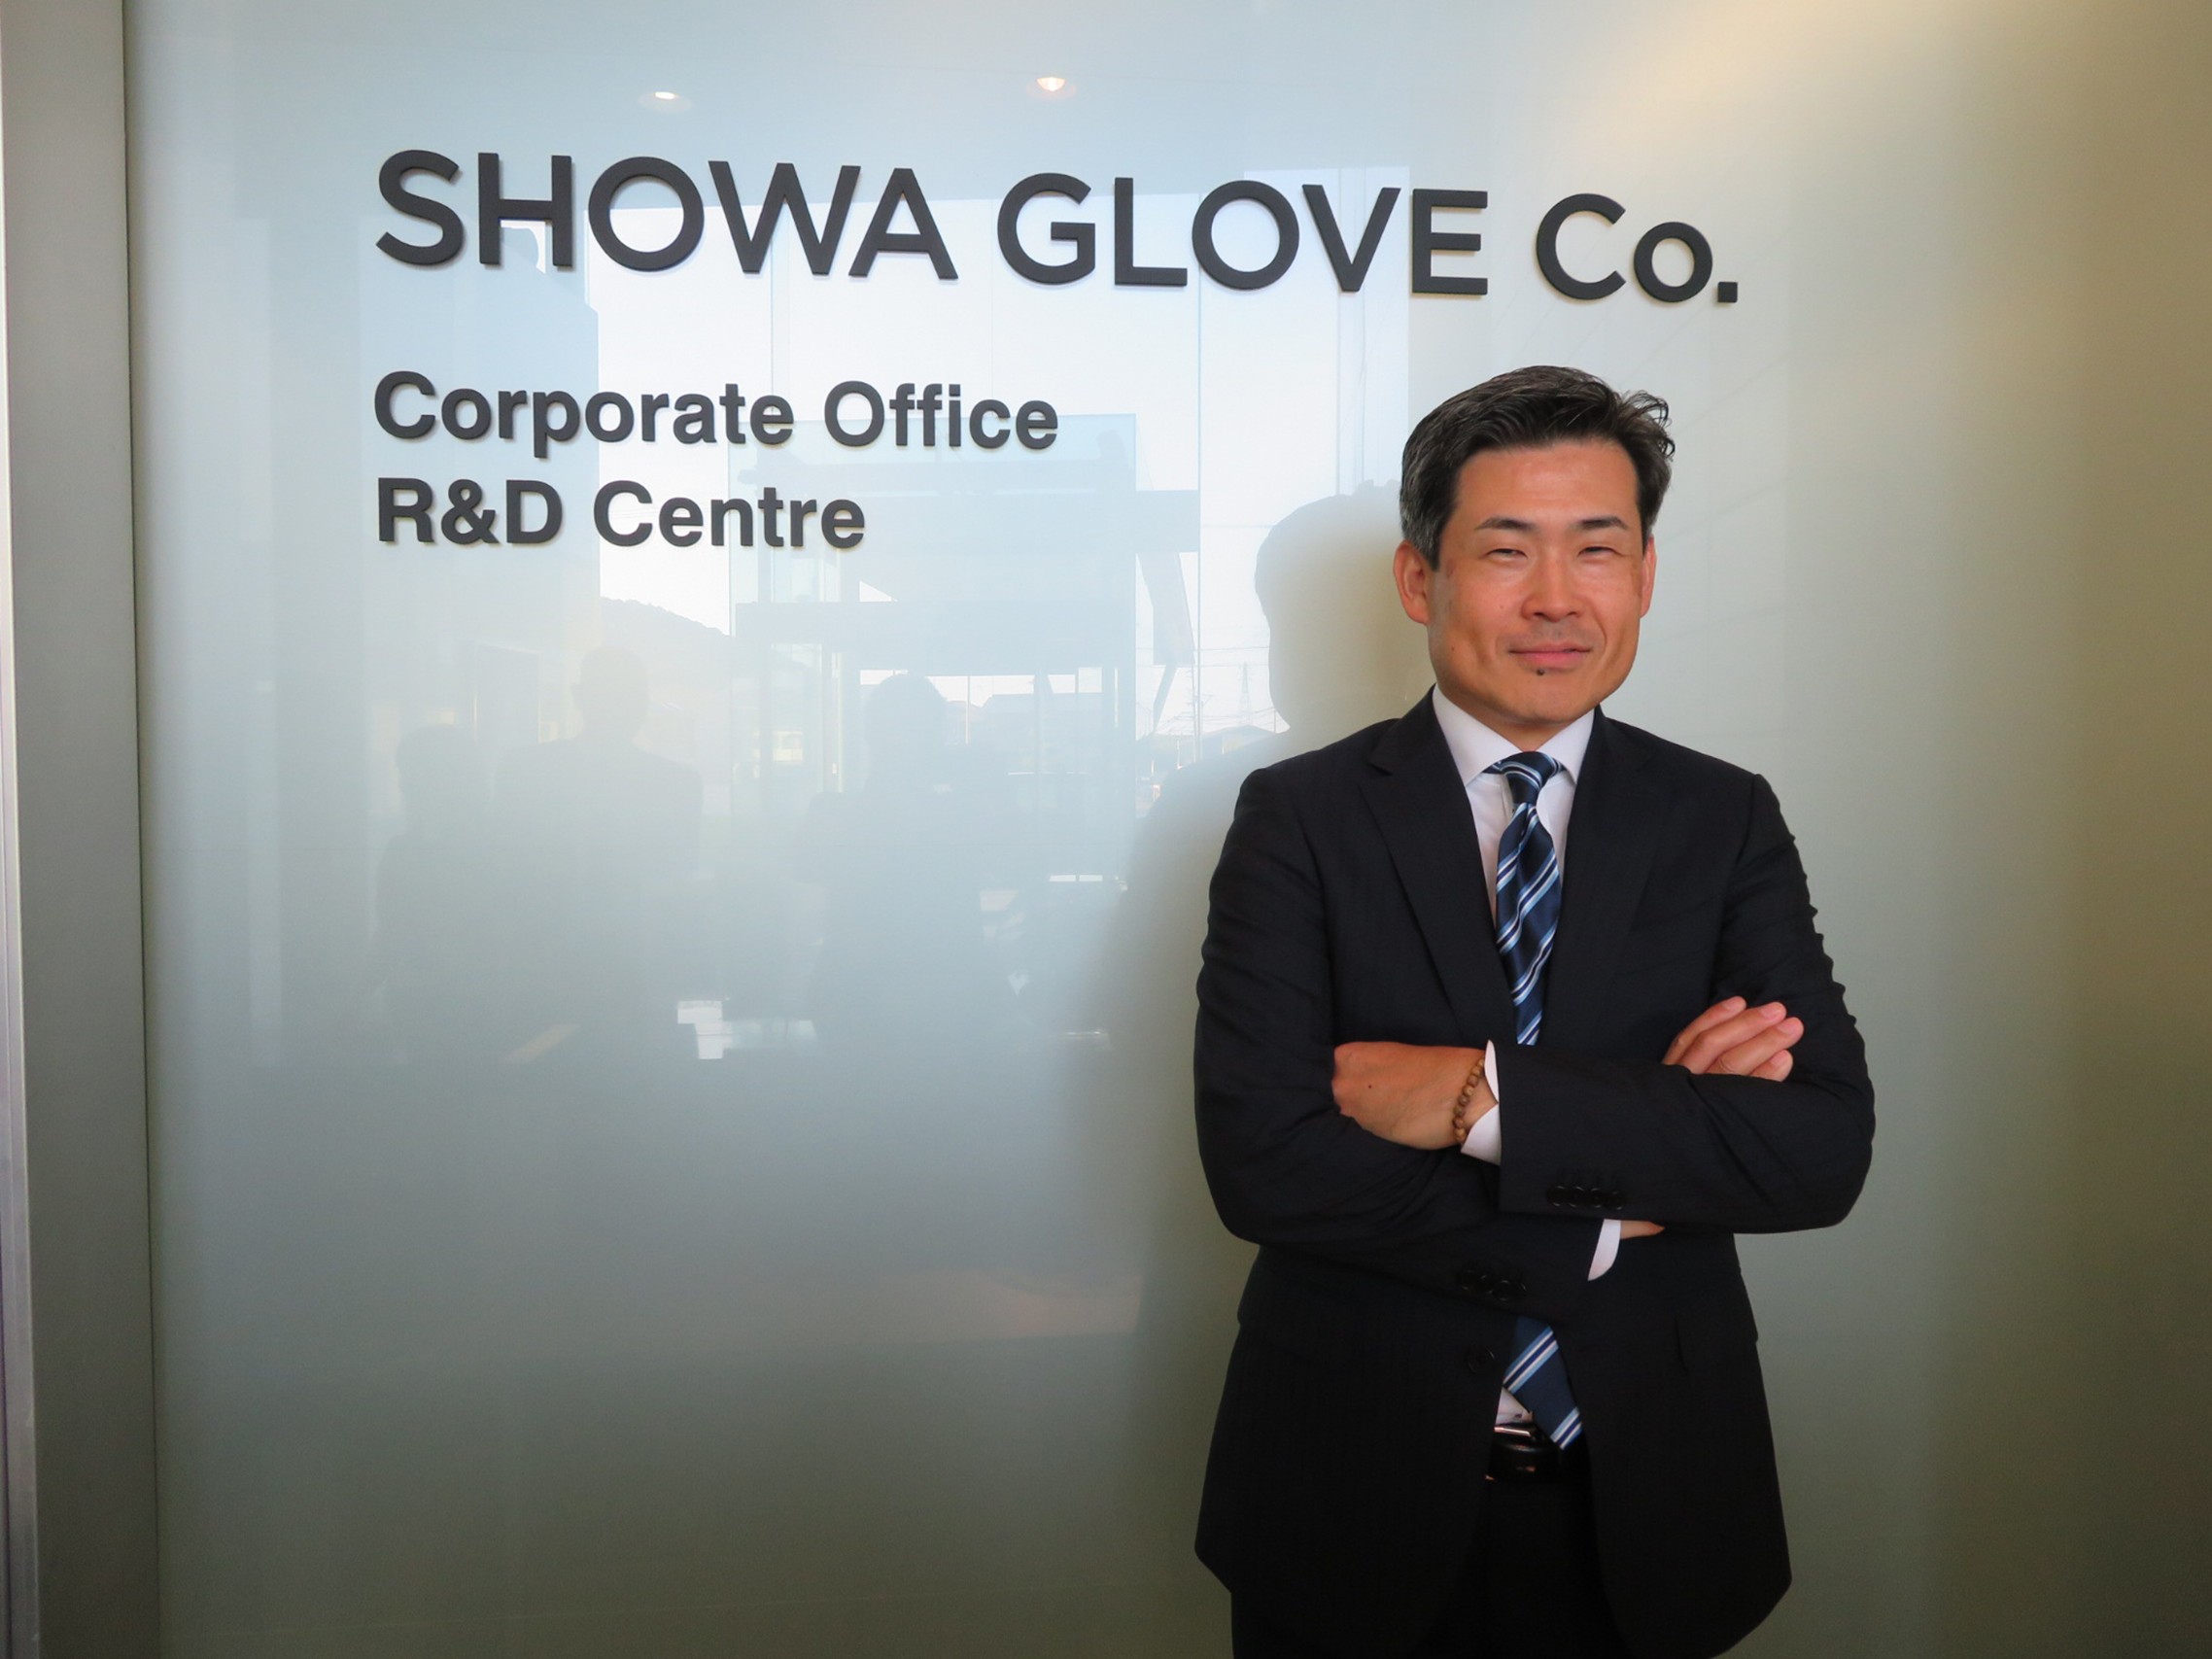 SHOWA GLOVE continues to revolutionise the hand protection solutions market